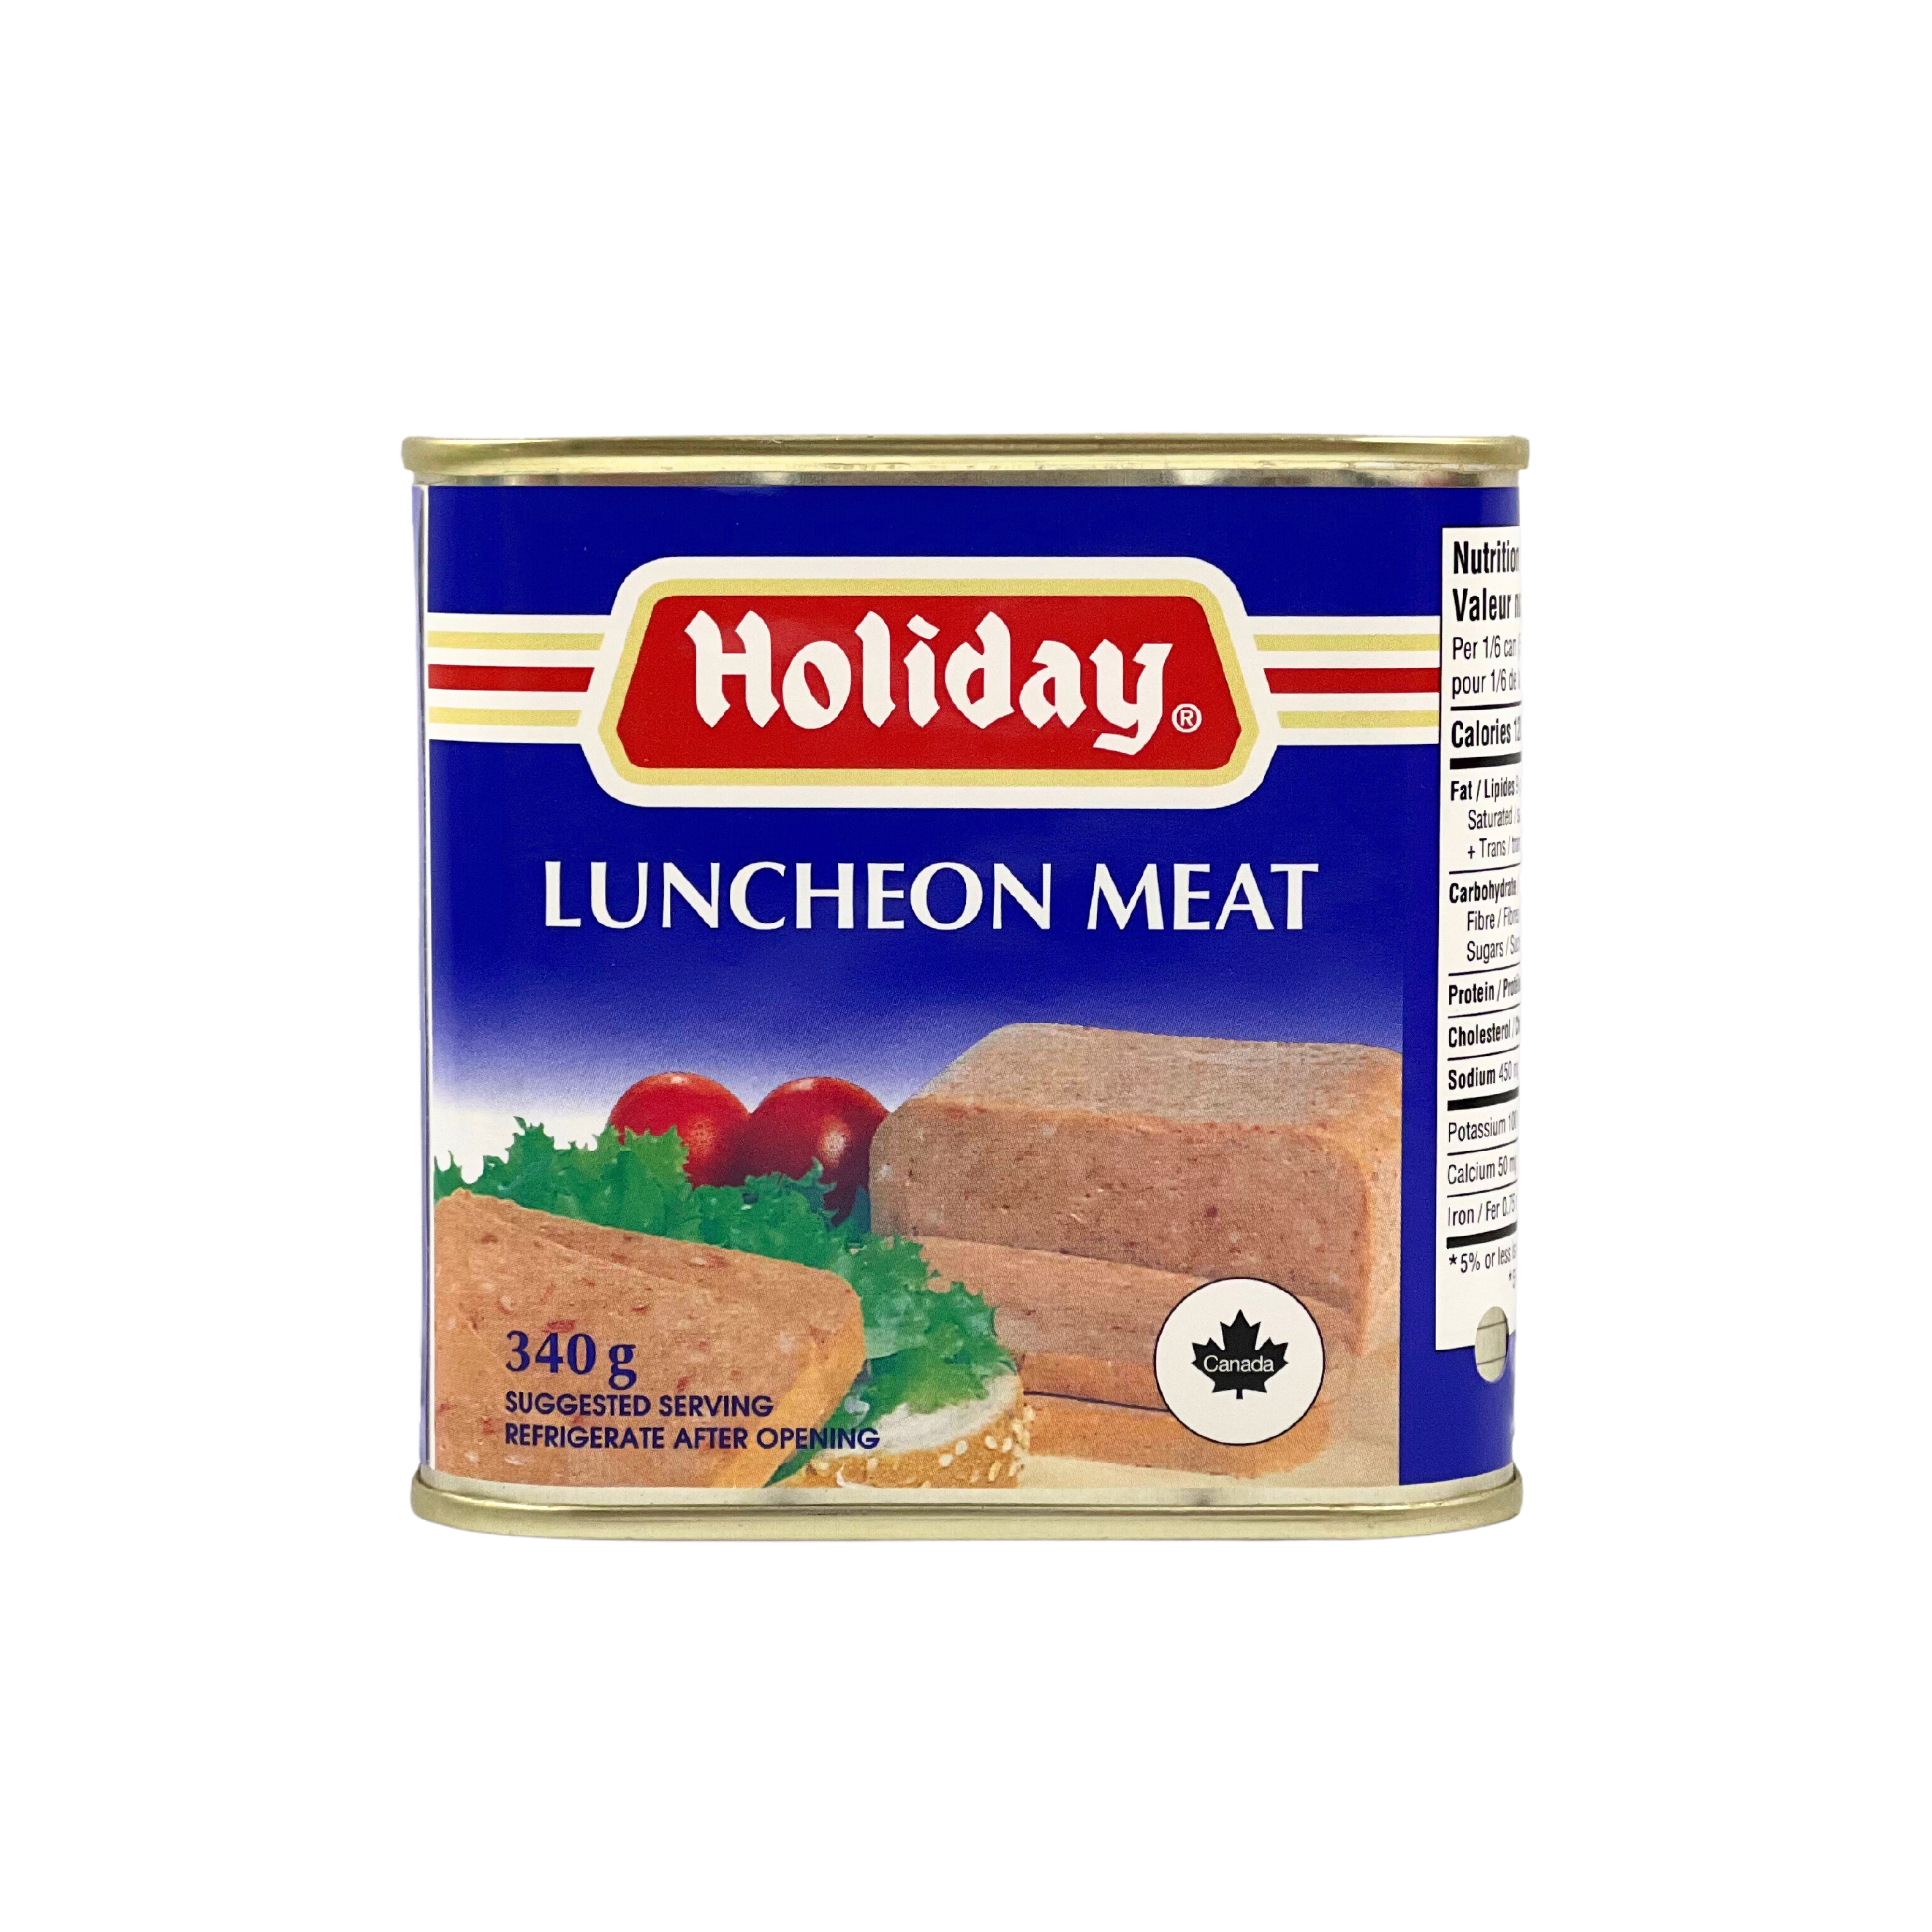 Holiday Luncheon Meat 340g